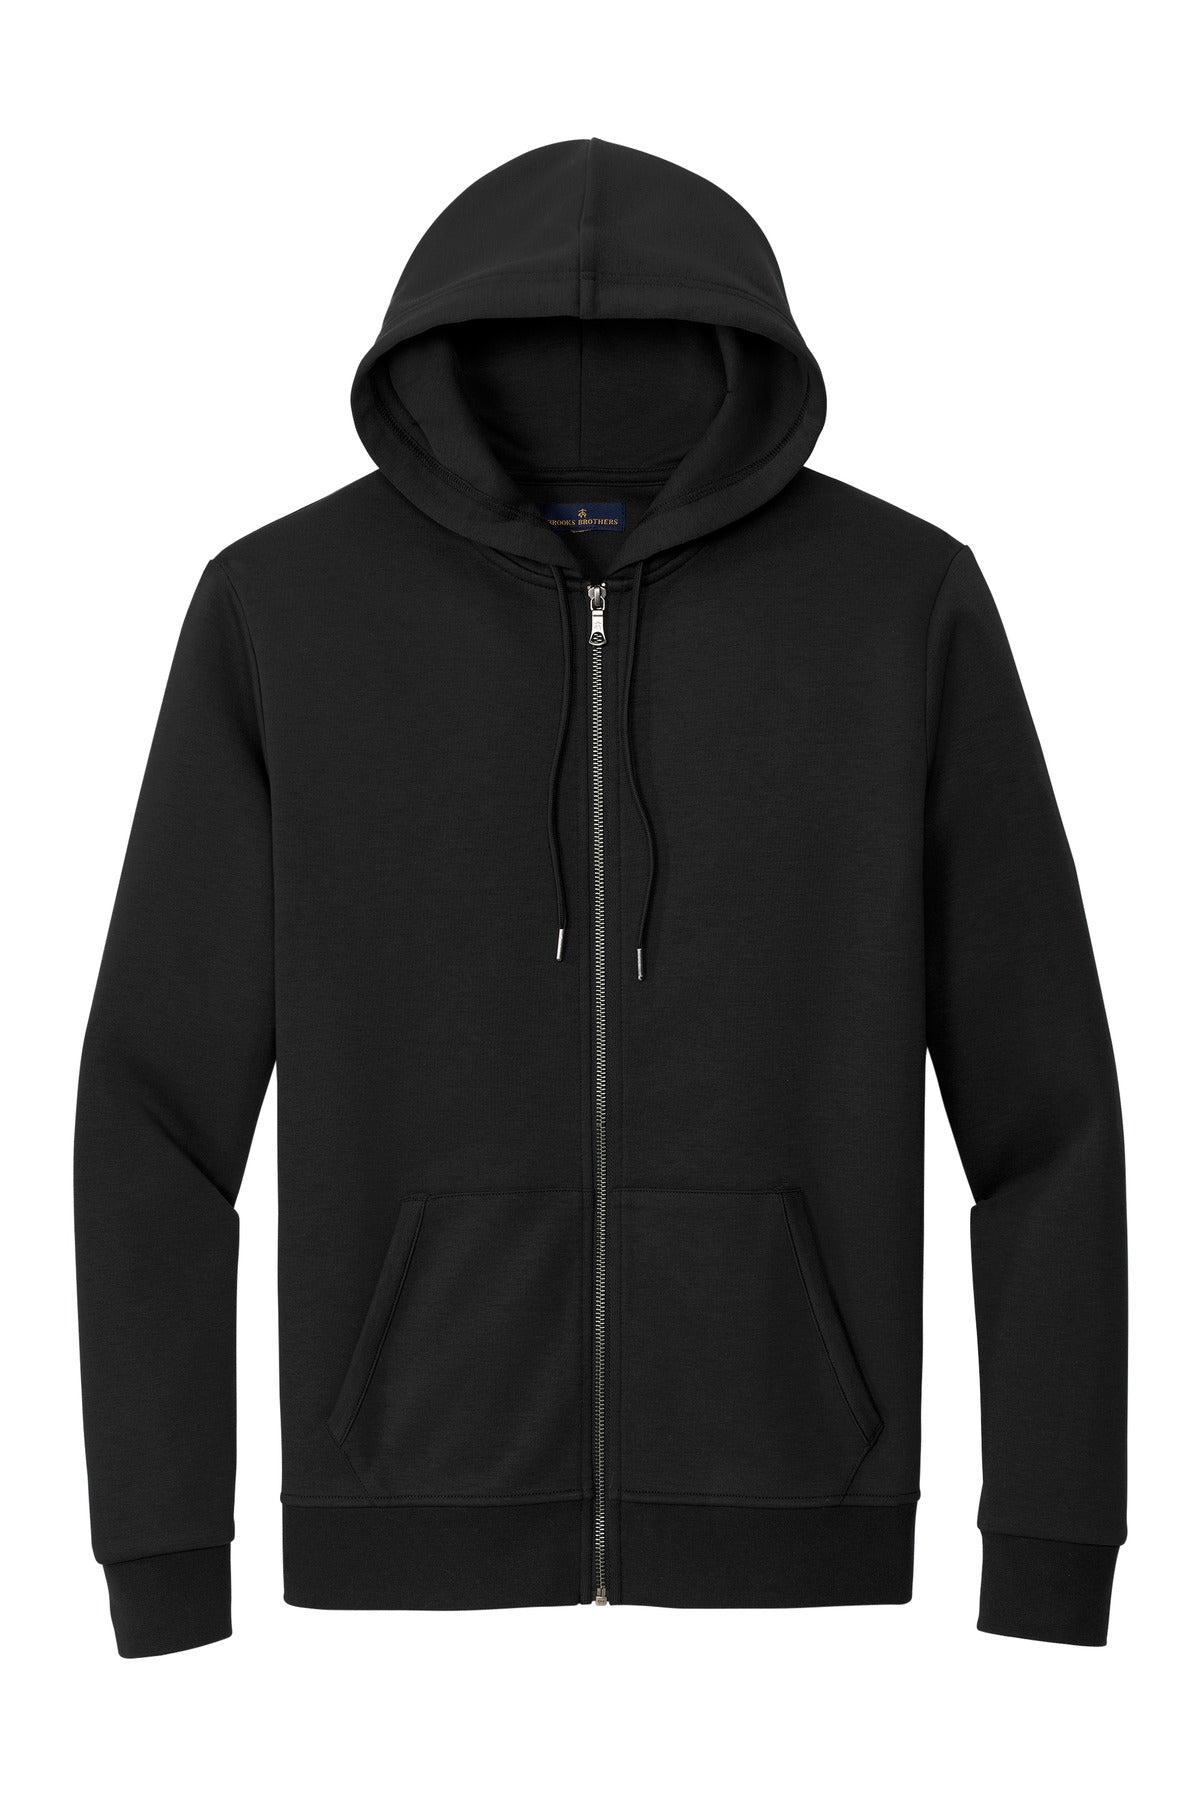 Brooks Brothers® Double-Knit Full-Zip Hoodie BB18208